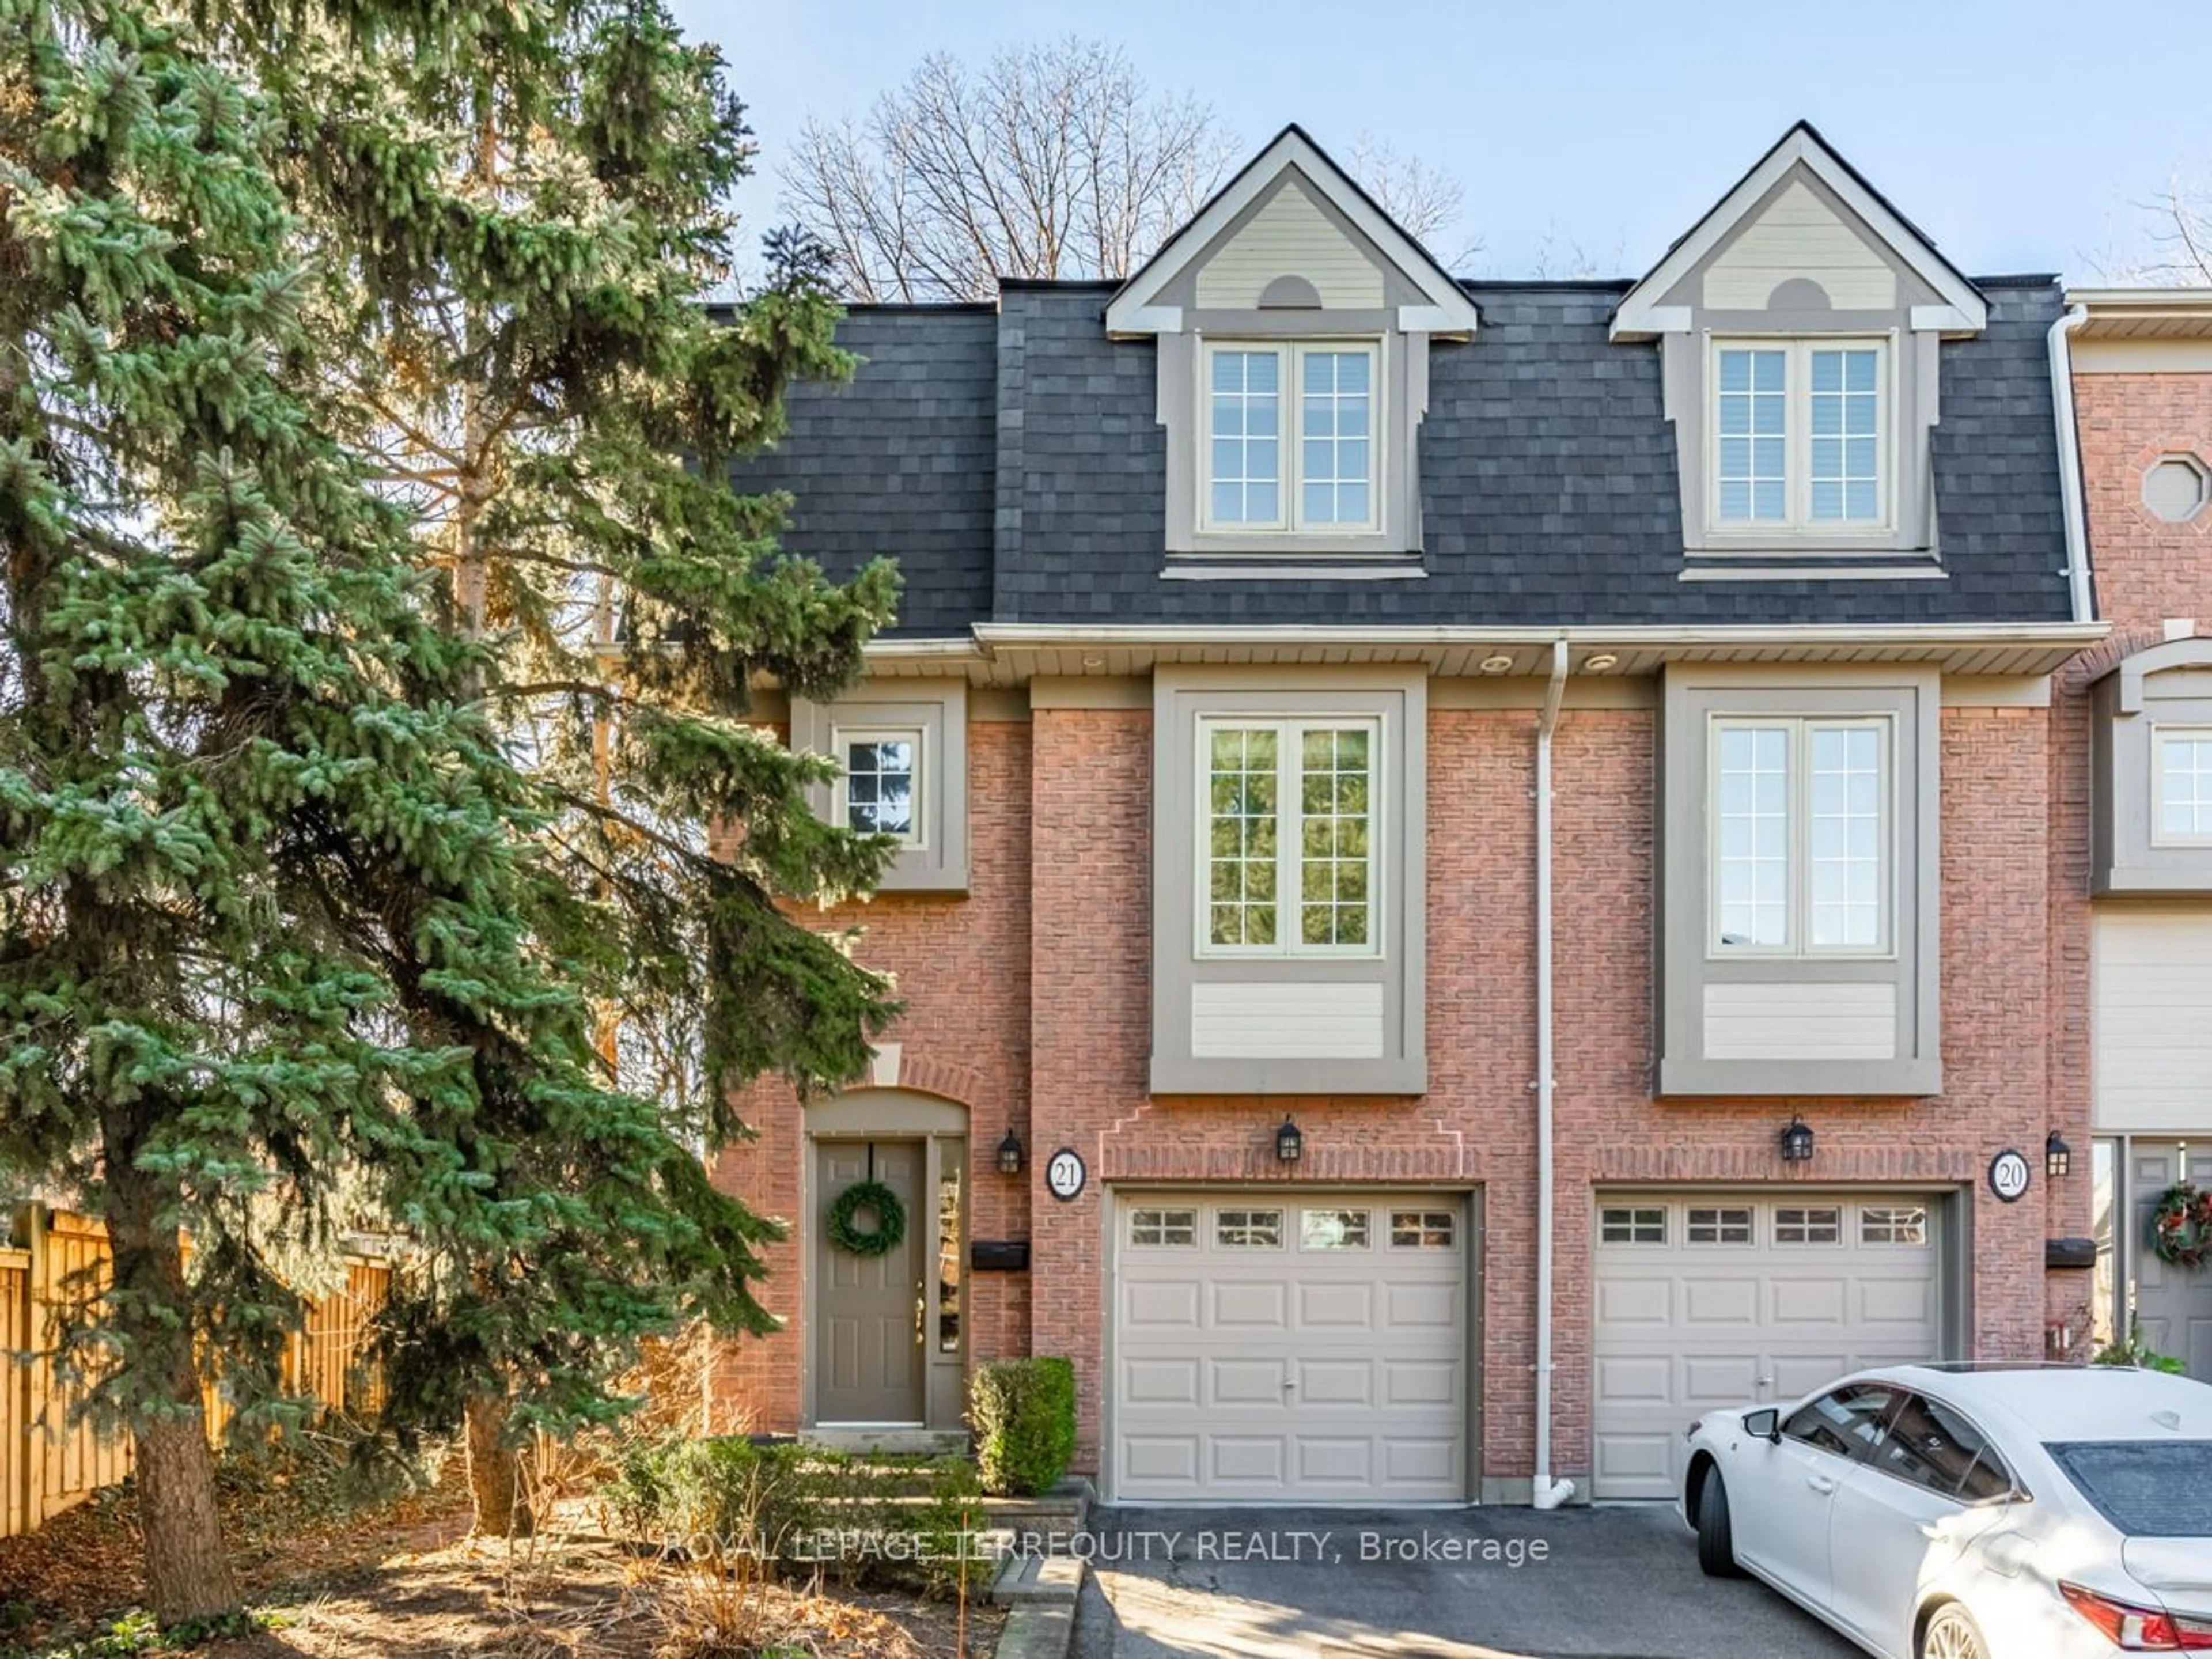 Home with brick exterior material for 3140 Fifth Line #21, Mississauga Ontario L5L 1A2